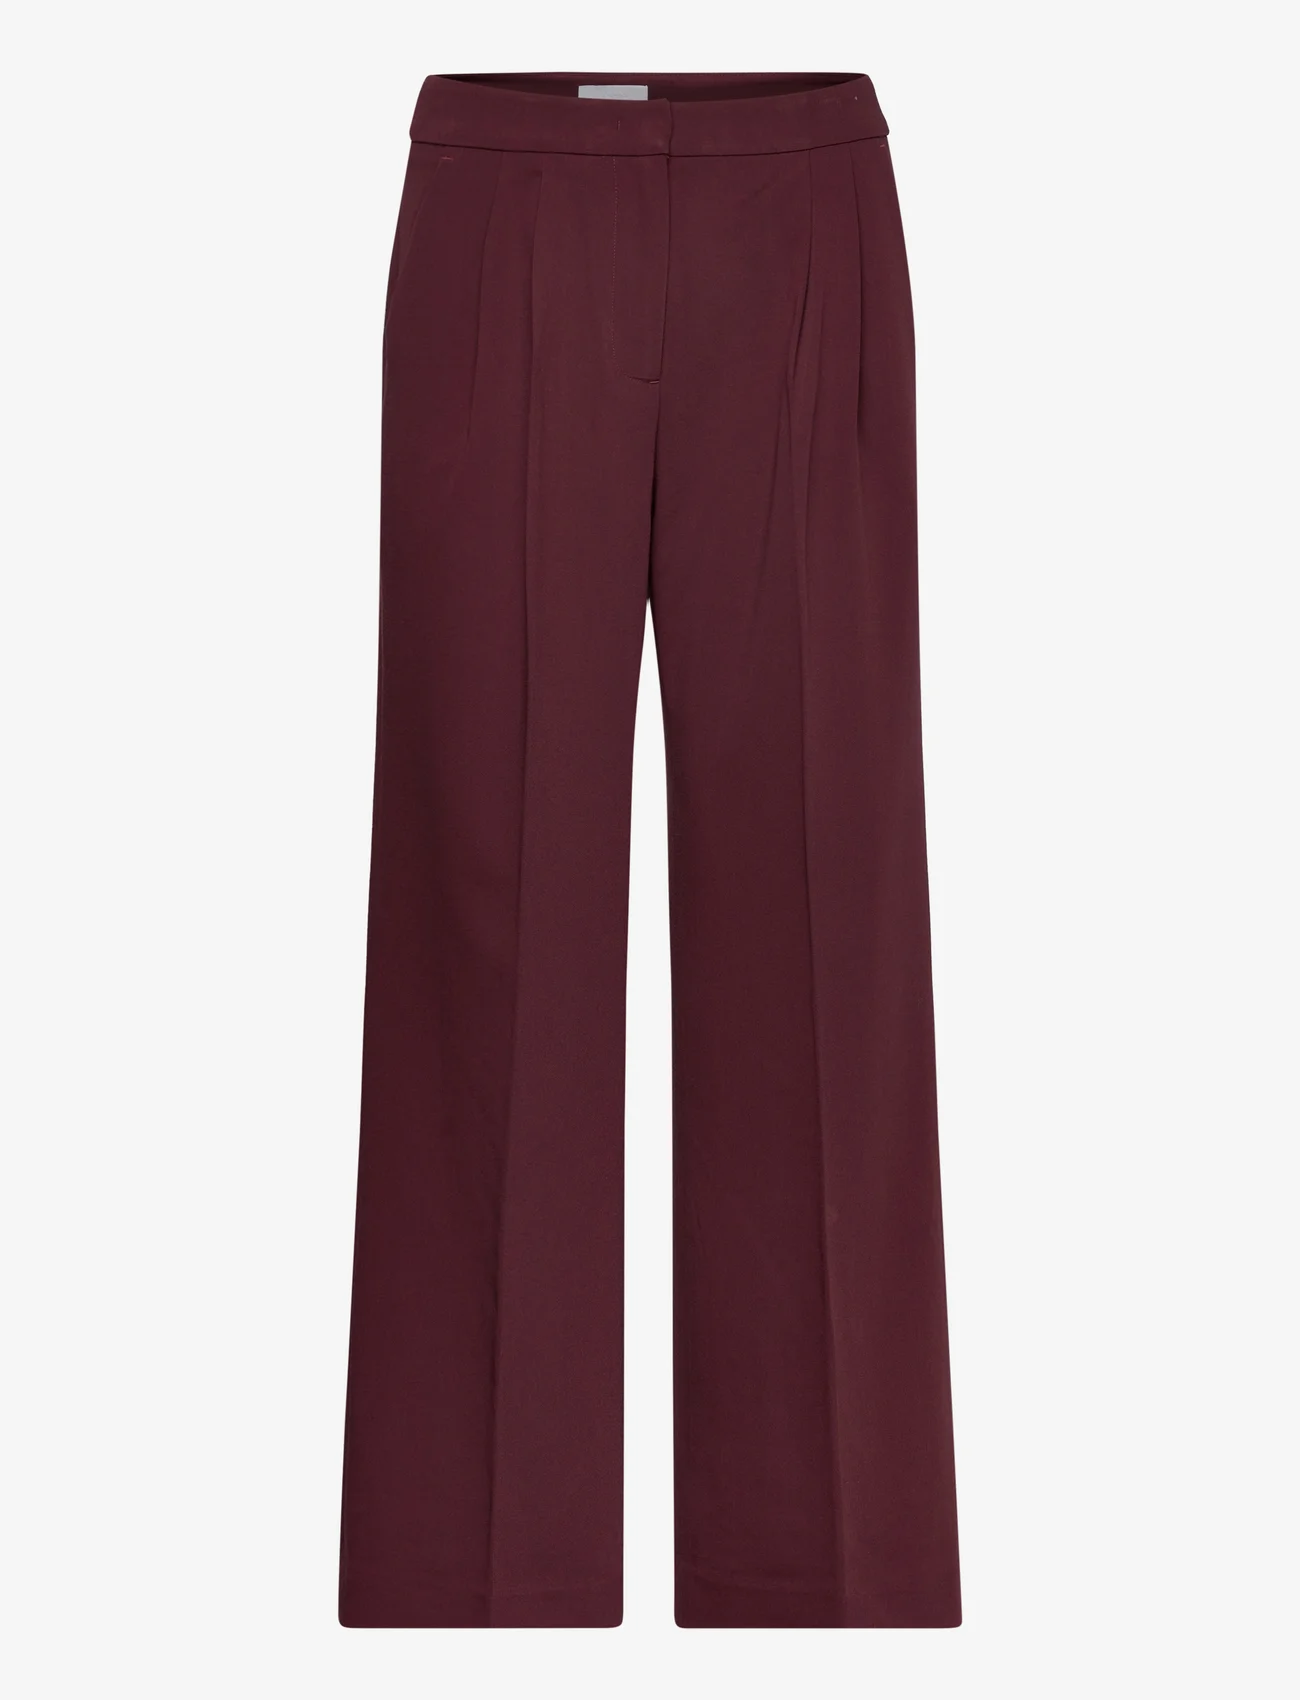 2NDDAY - 2ND Mille - Daily Sleek - wide leg trousers - decadent chocolate - 0